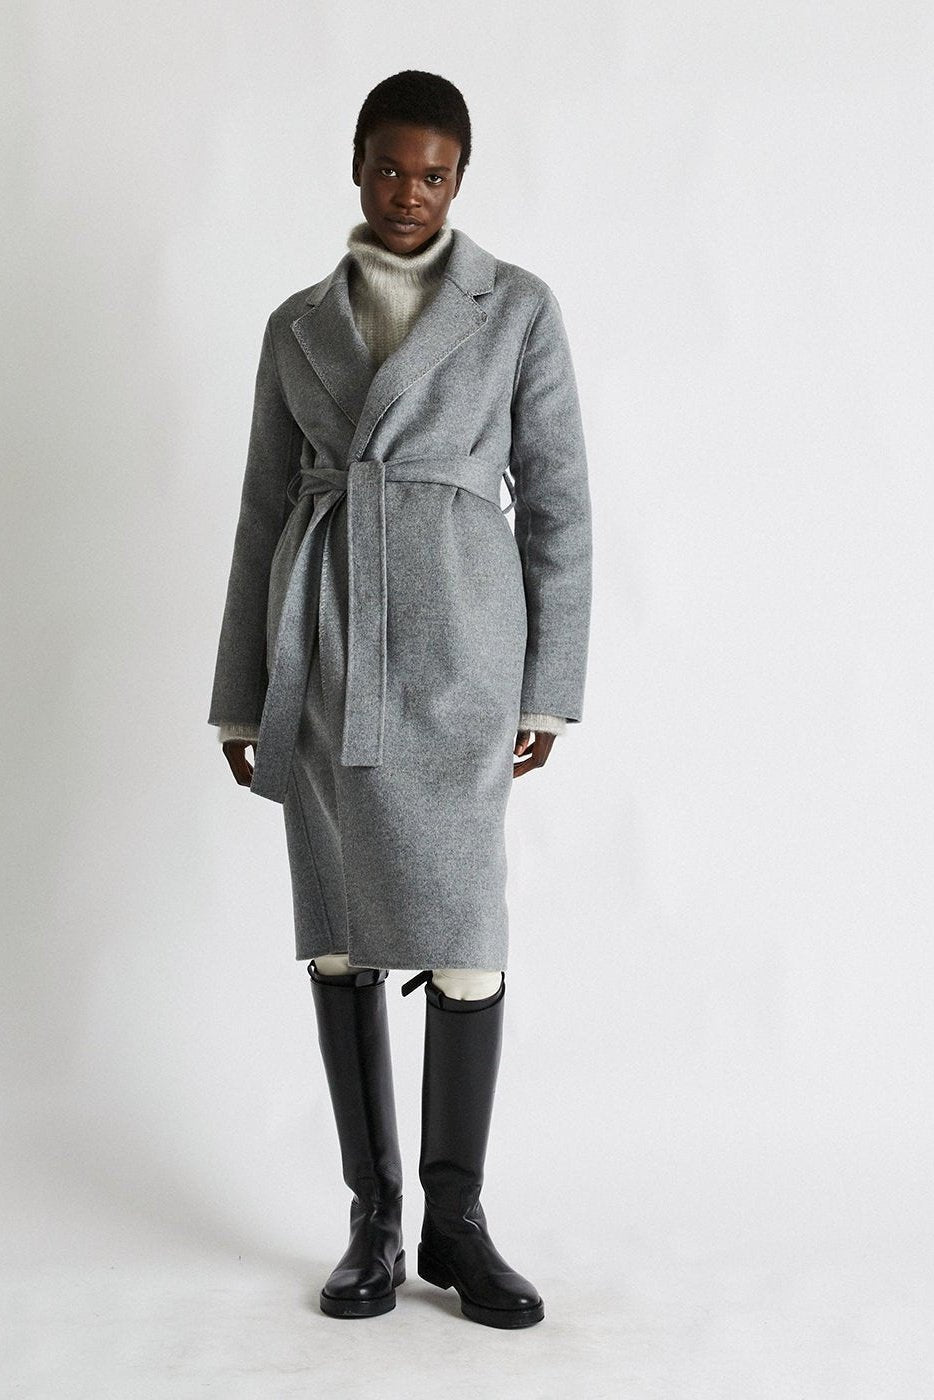 + Beryll Cashmere Trench Coat - +Beryll Cashmere Trench Coat - +Beryll Worn By Good People